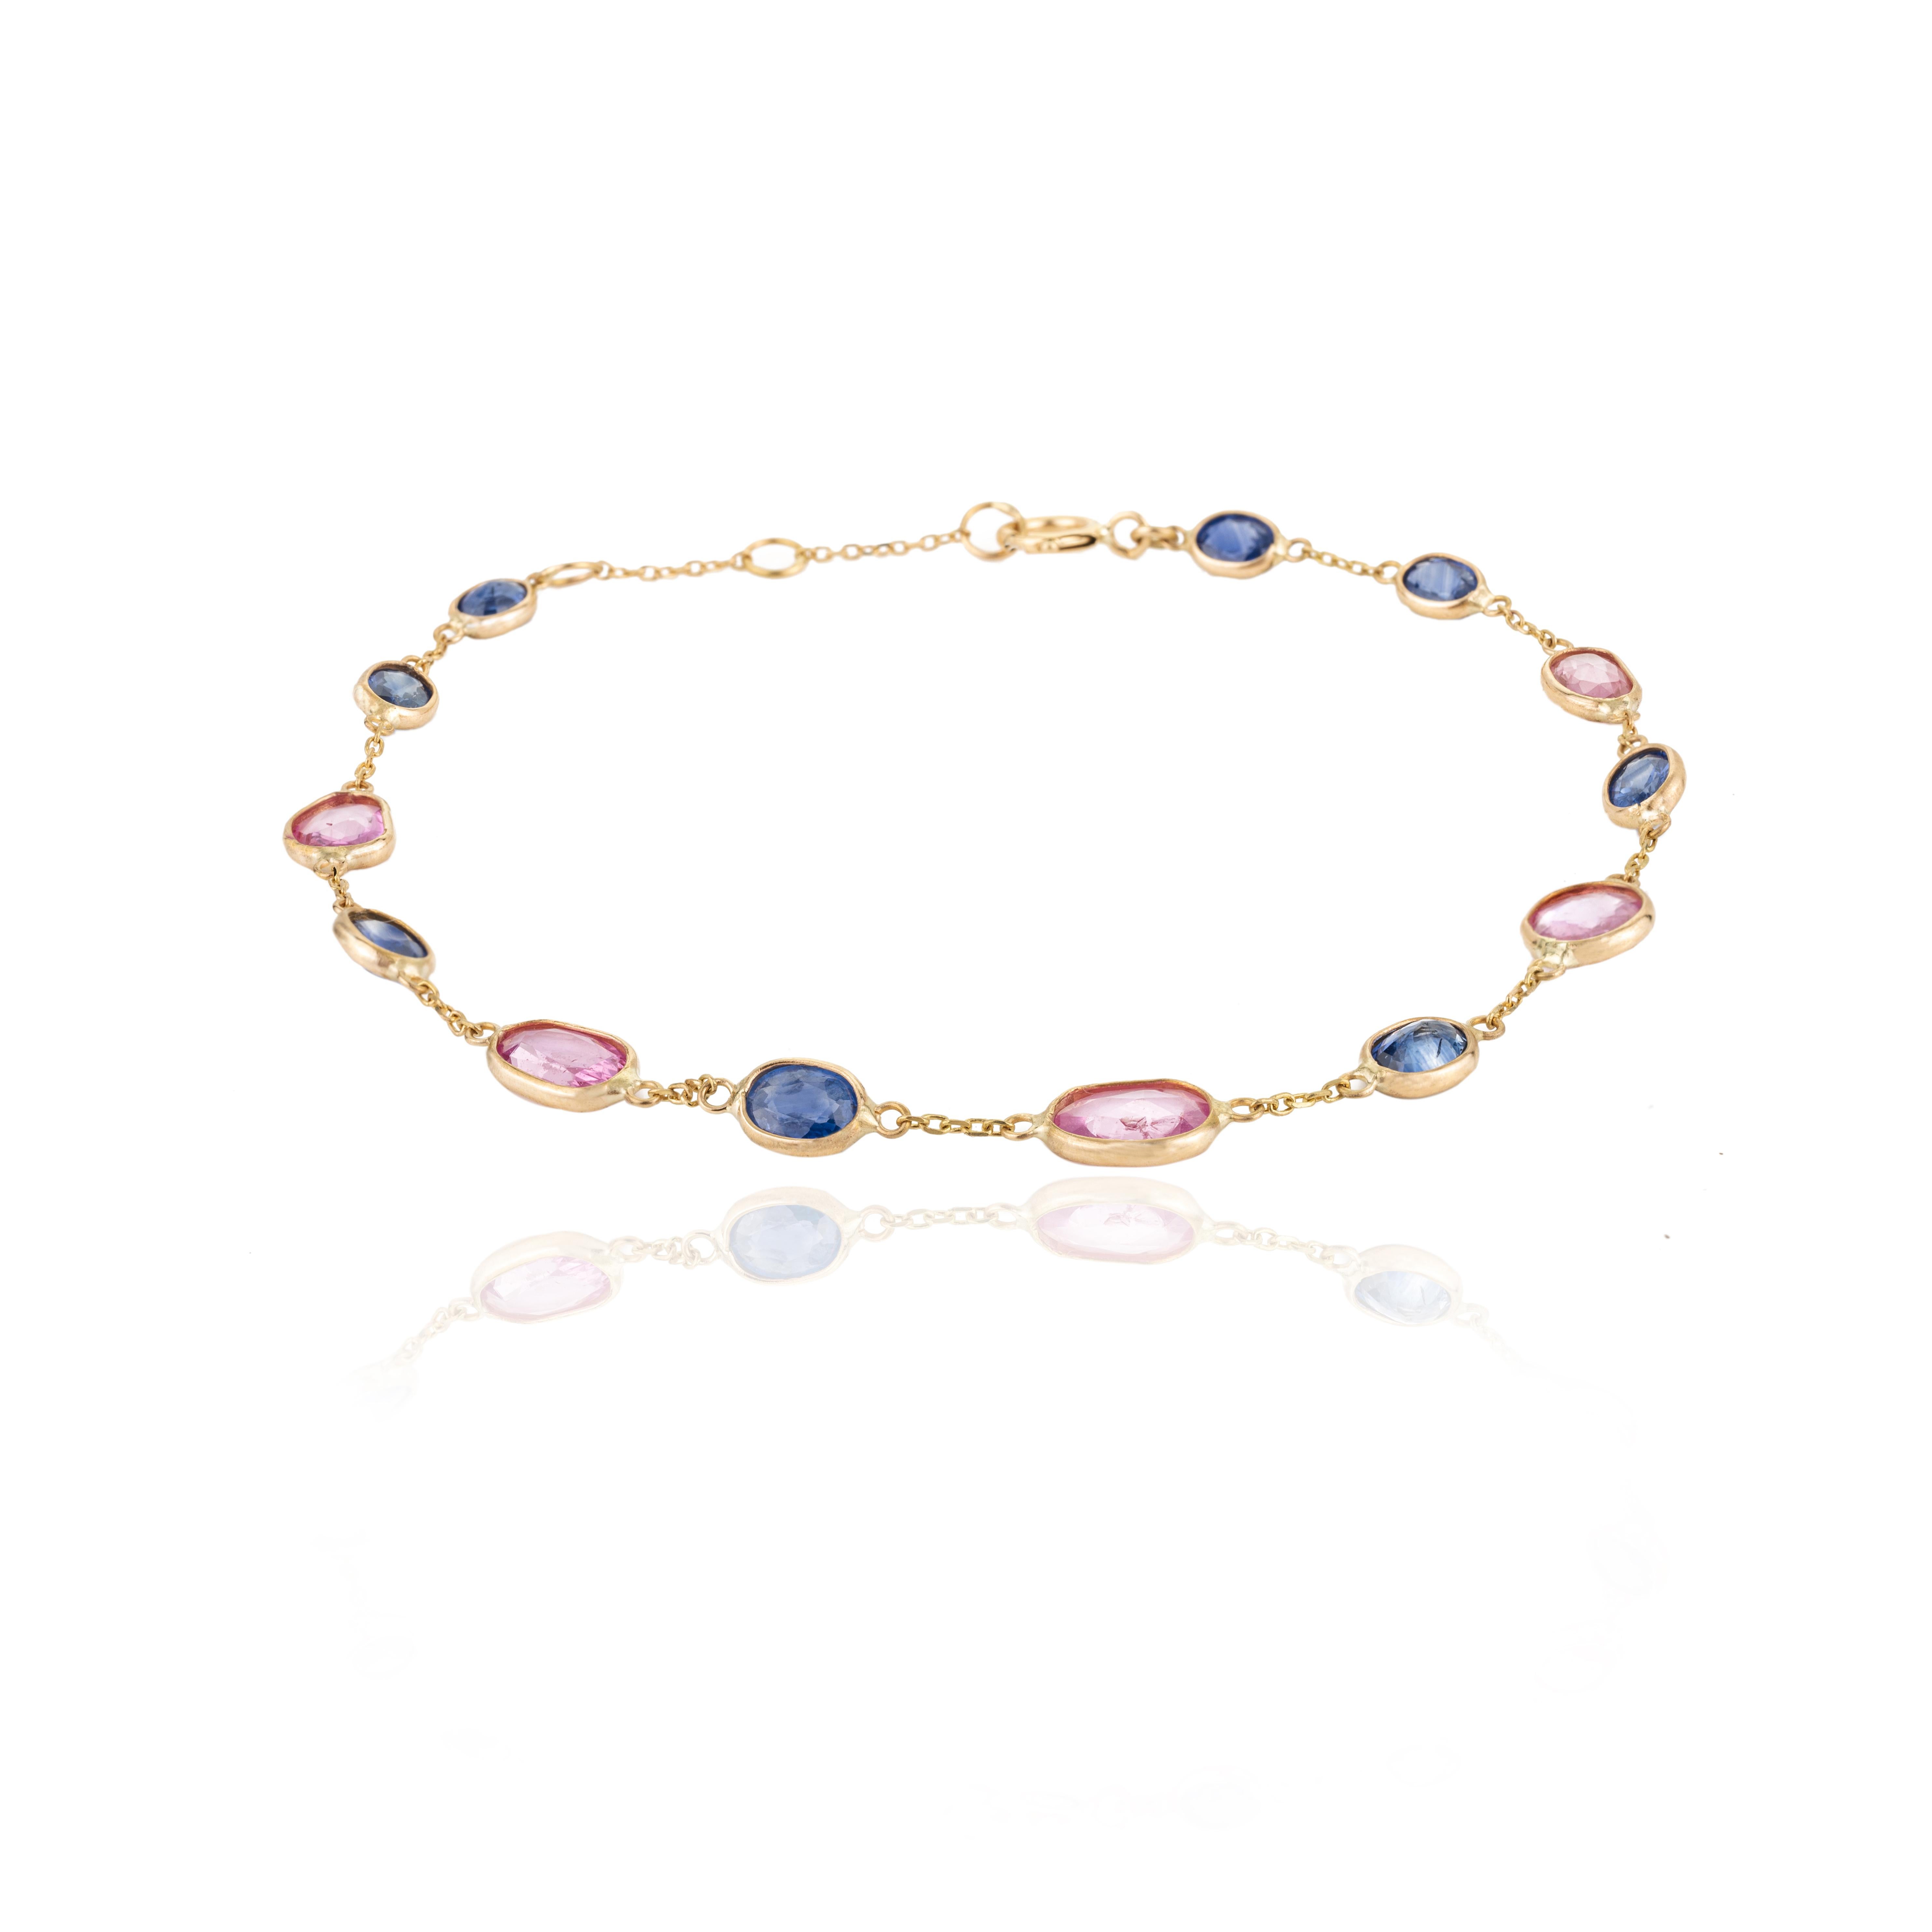 4.25 Carat Multi Sapphire Chain Bracelet Crafted in 18k Yellow Gold Settings For Sale 1